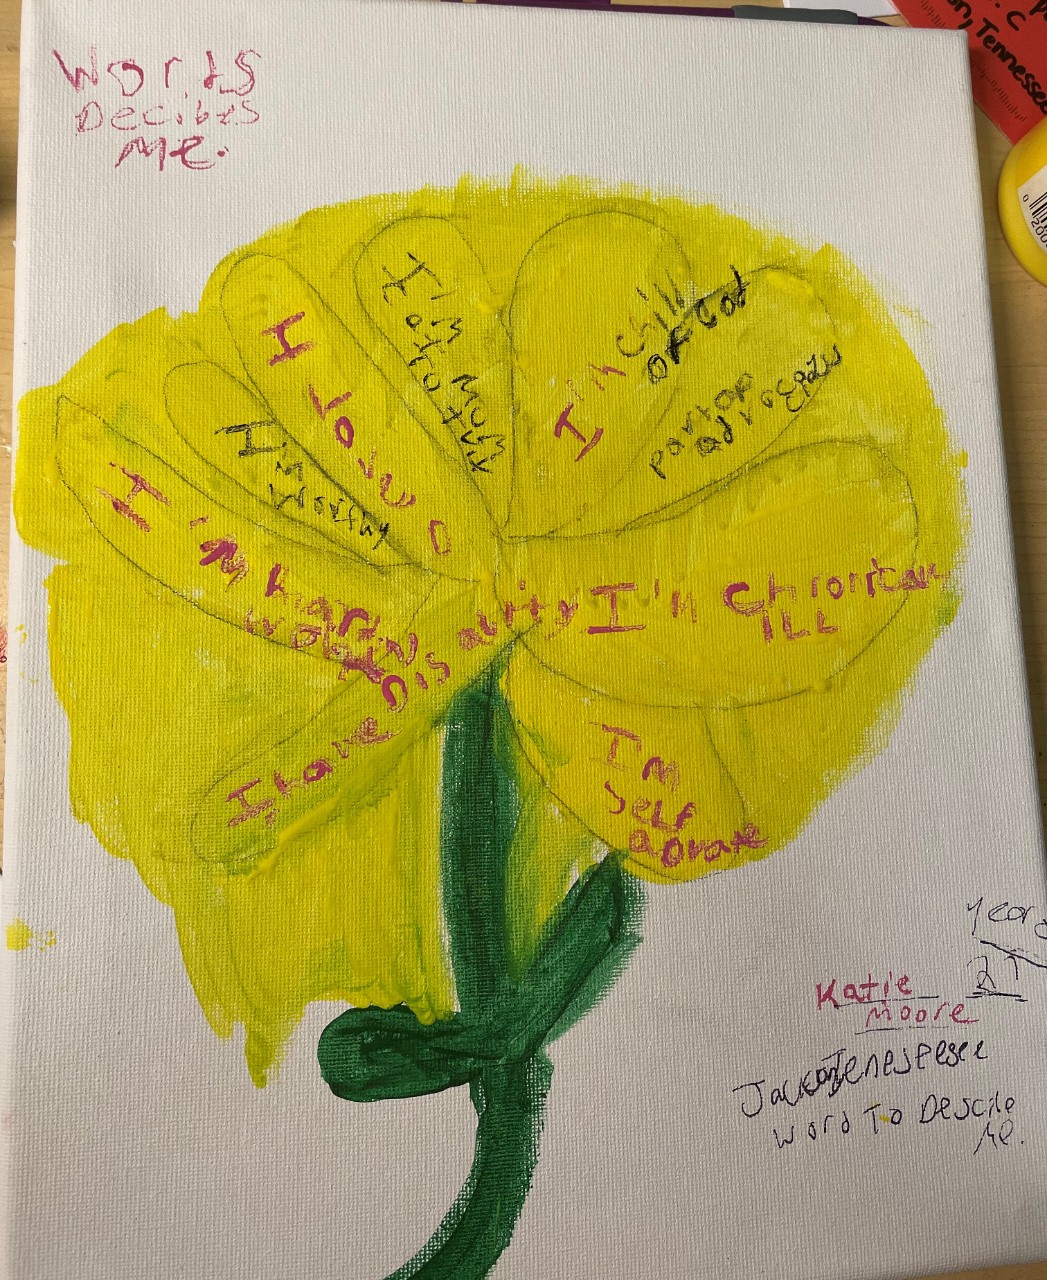 A painting of a yellow flower with a green stem. Words on the flower petals contain phrases like “I’m child of God,” “I’m chronically ill,” “I’m worthy.” 